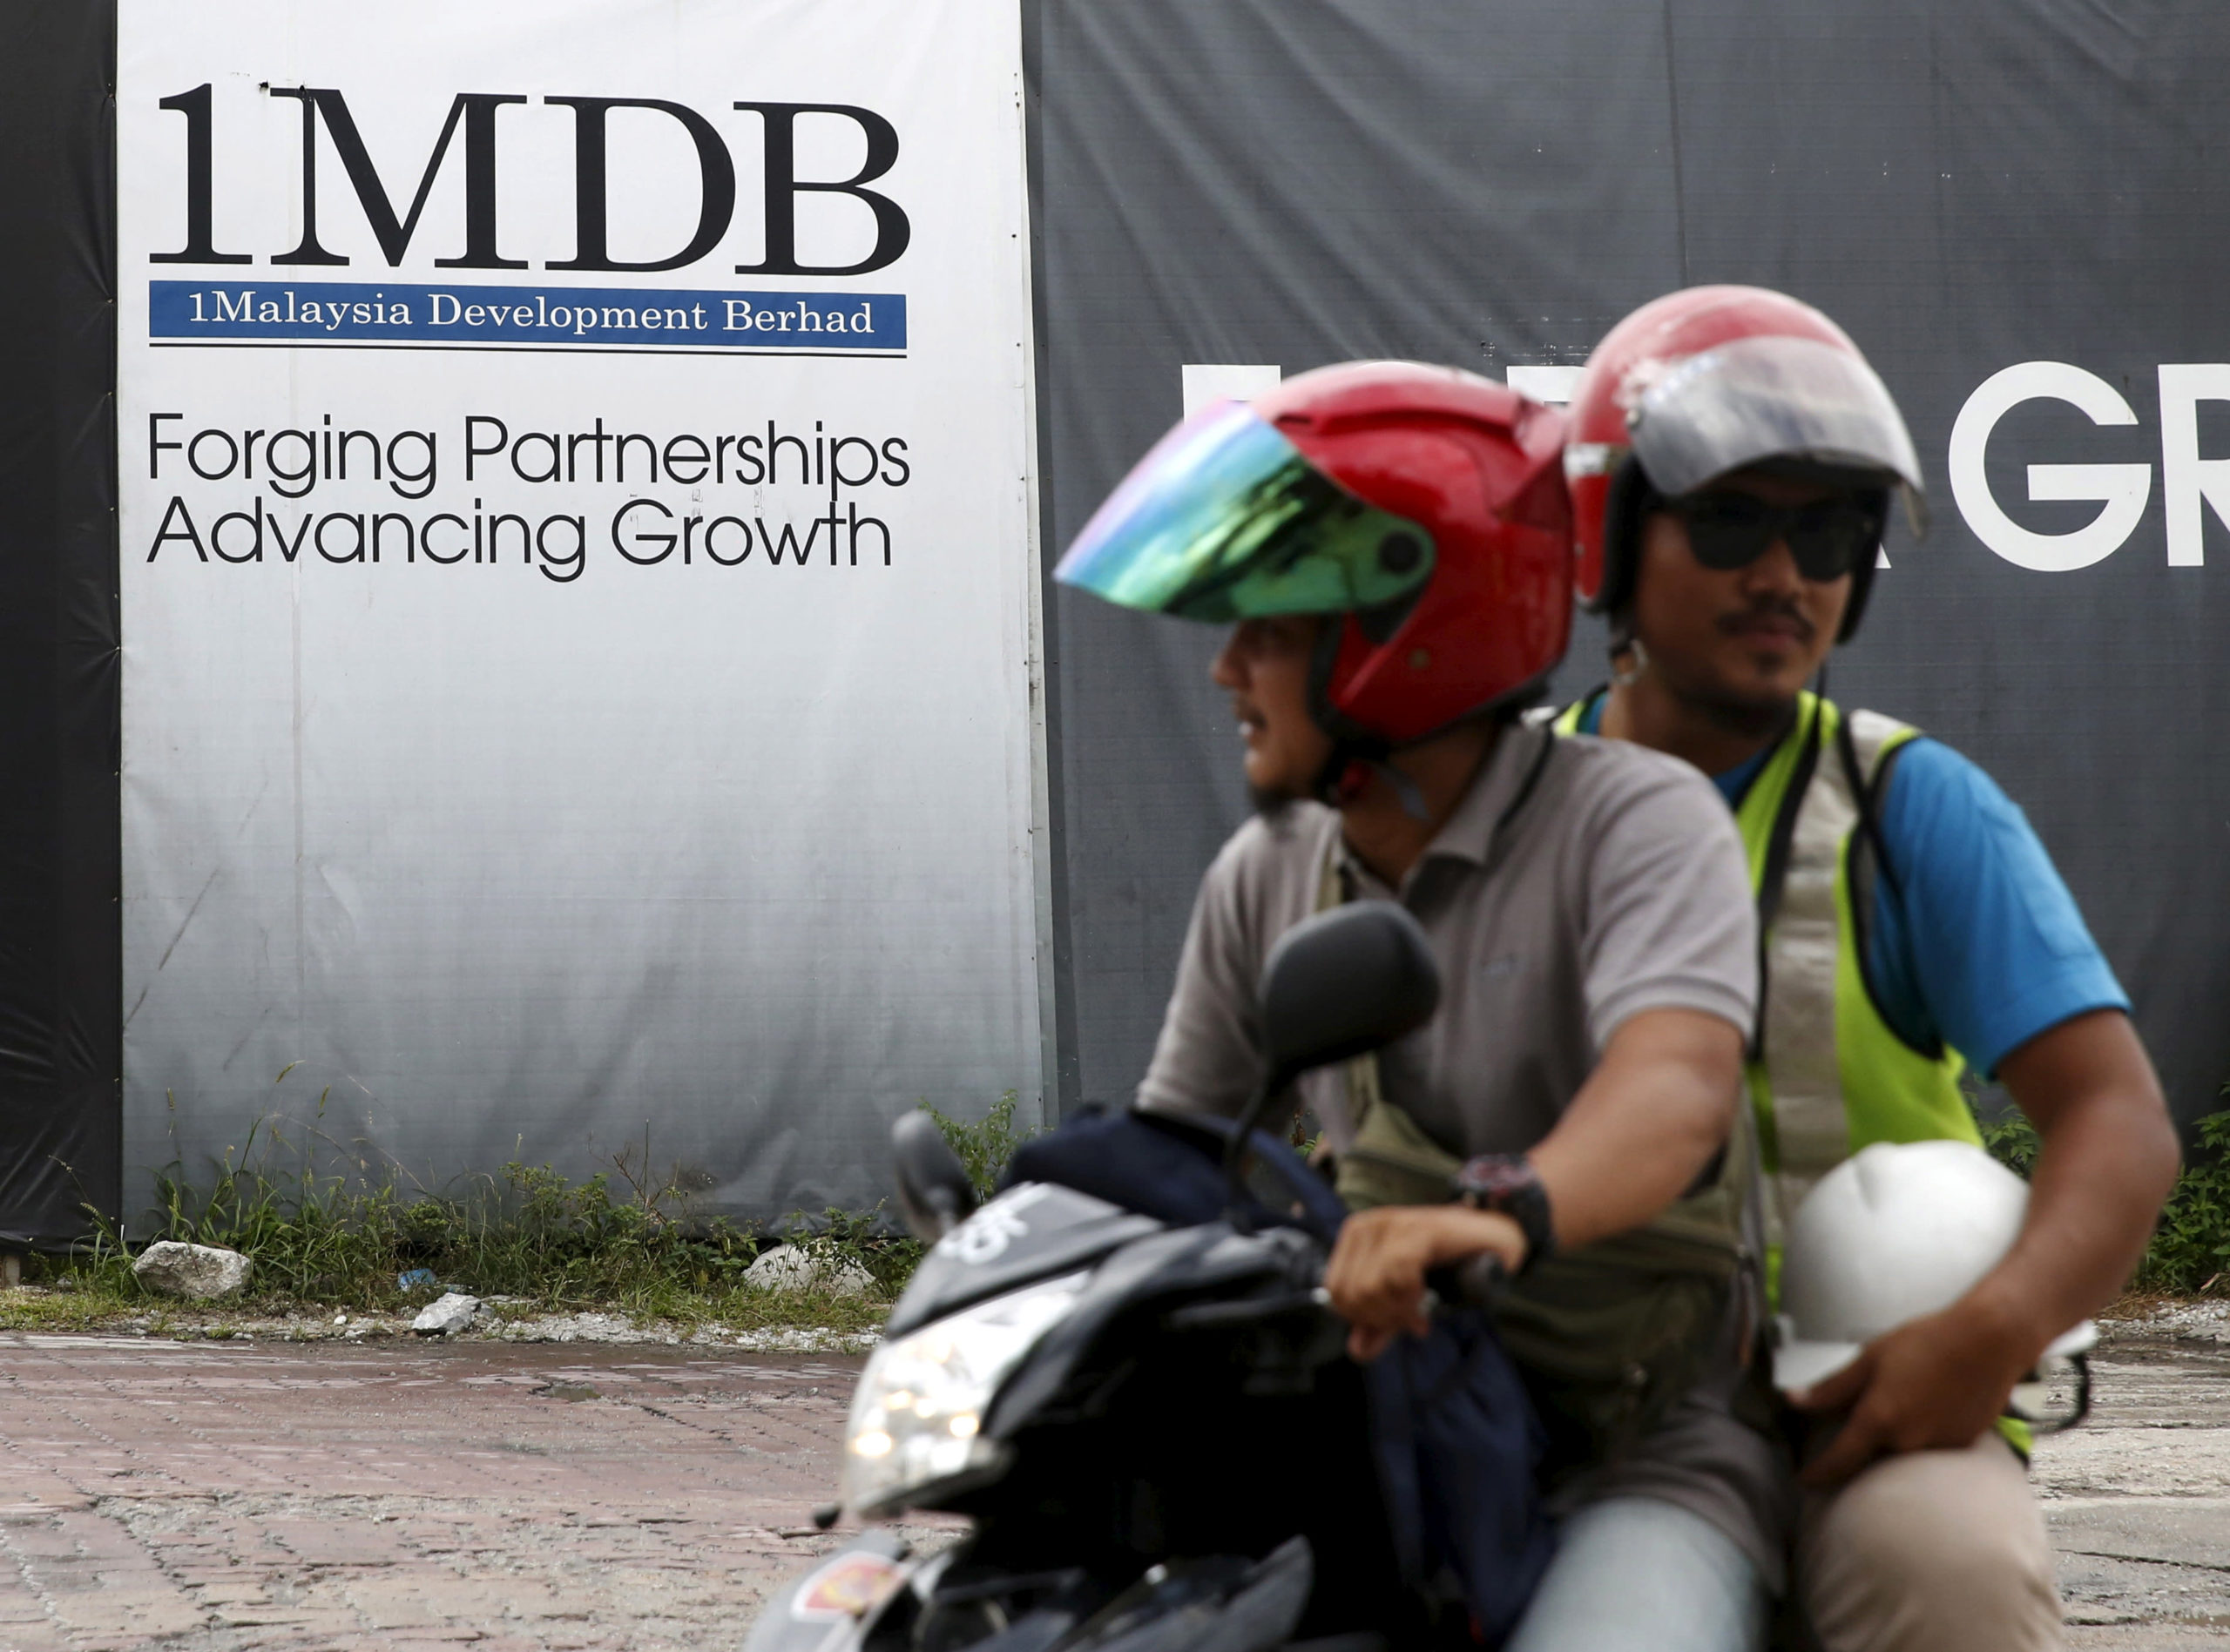 Goldman Sachs cuts earnings, citing provisions referring to the 1MDB scandal